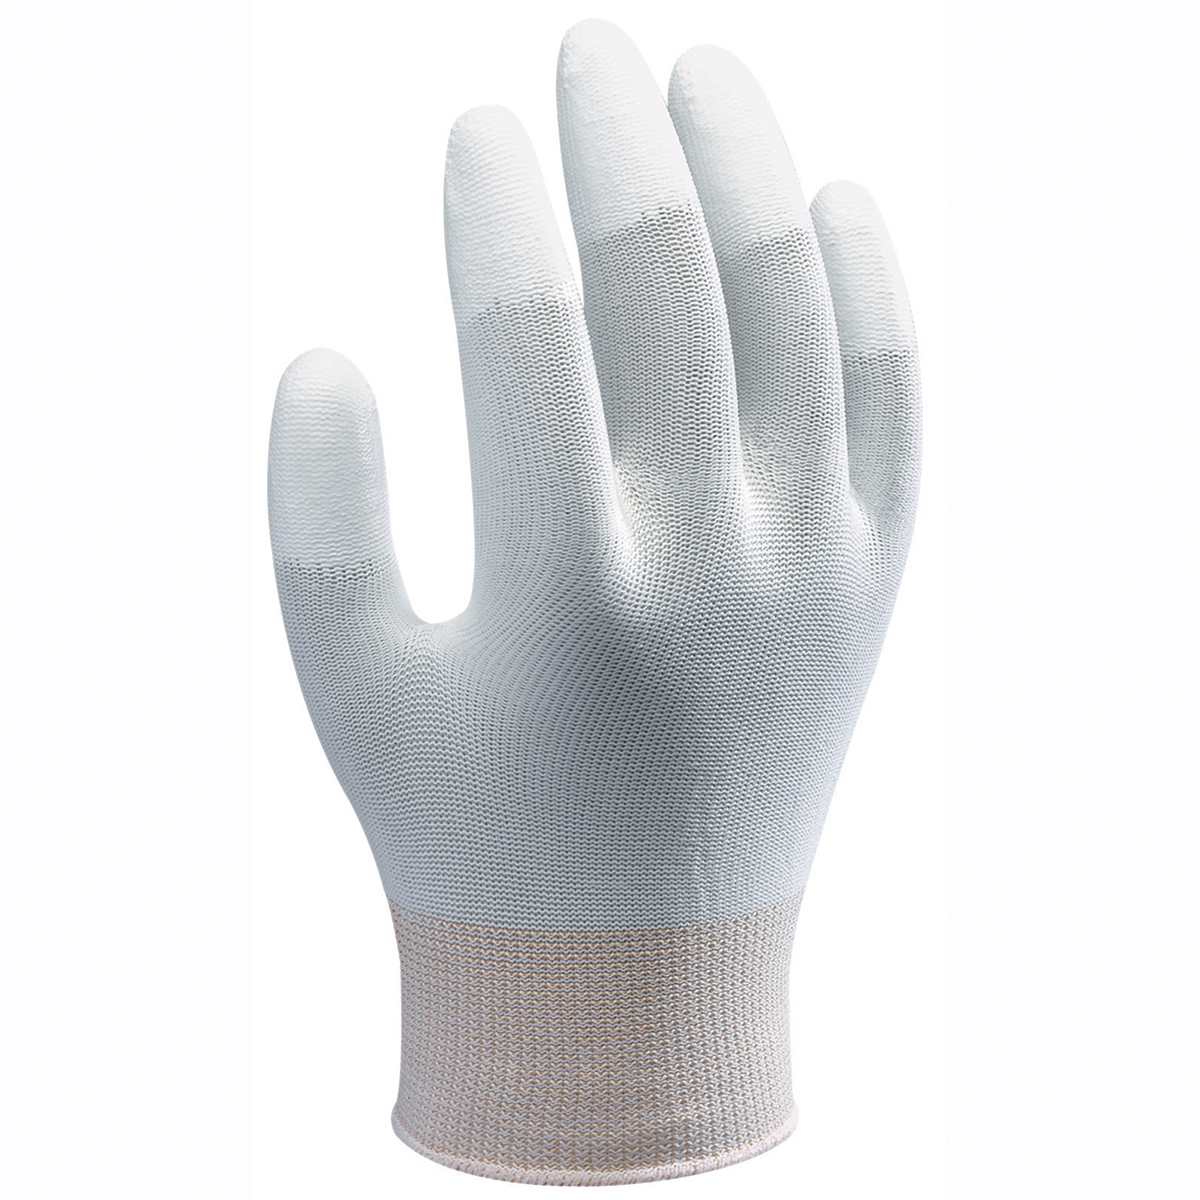 SHOWA® 13 Gauge Polyurethane Fingertips Coated Work Gloves With Nylon Knit Liner And Knit Wrist